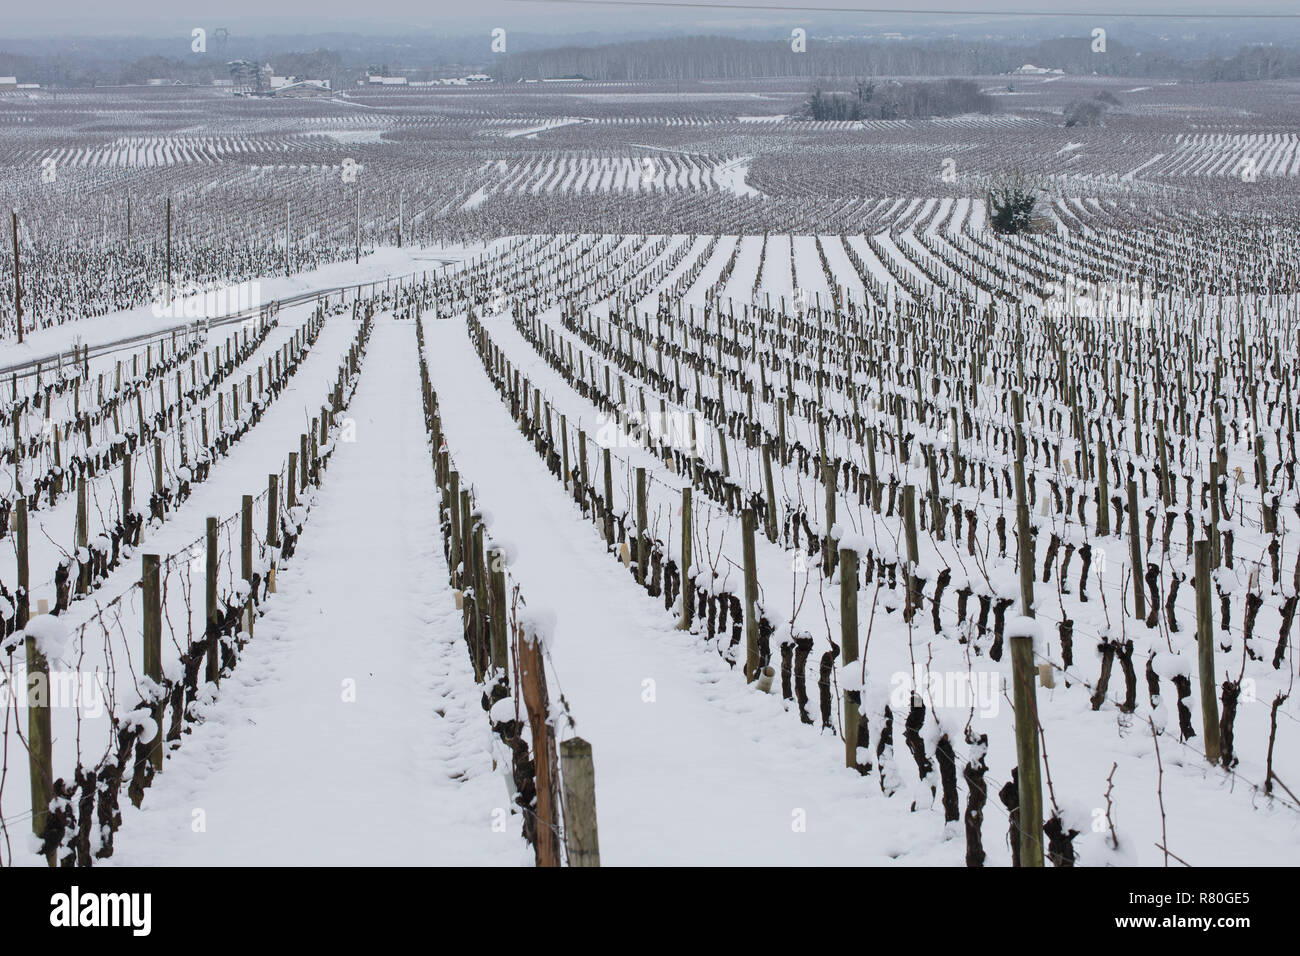 Landscape of the Touraine province covered in snow: vines and vineyards under snow in the area of Chinon (2018/02/07) Stock Photo